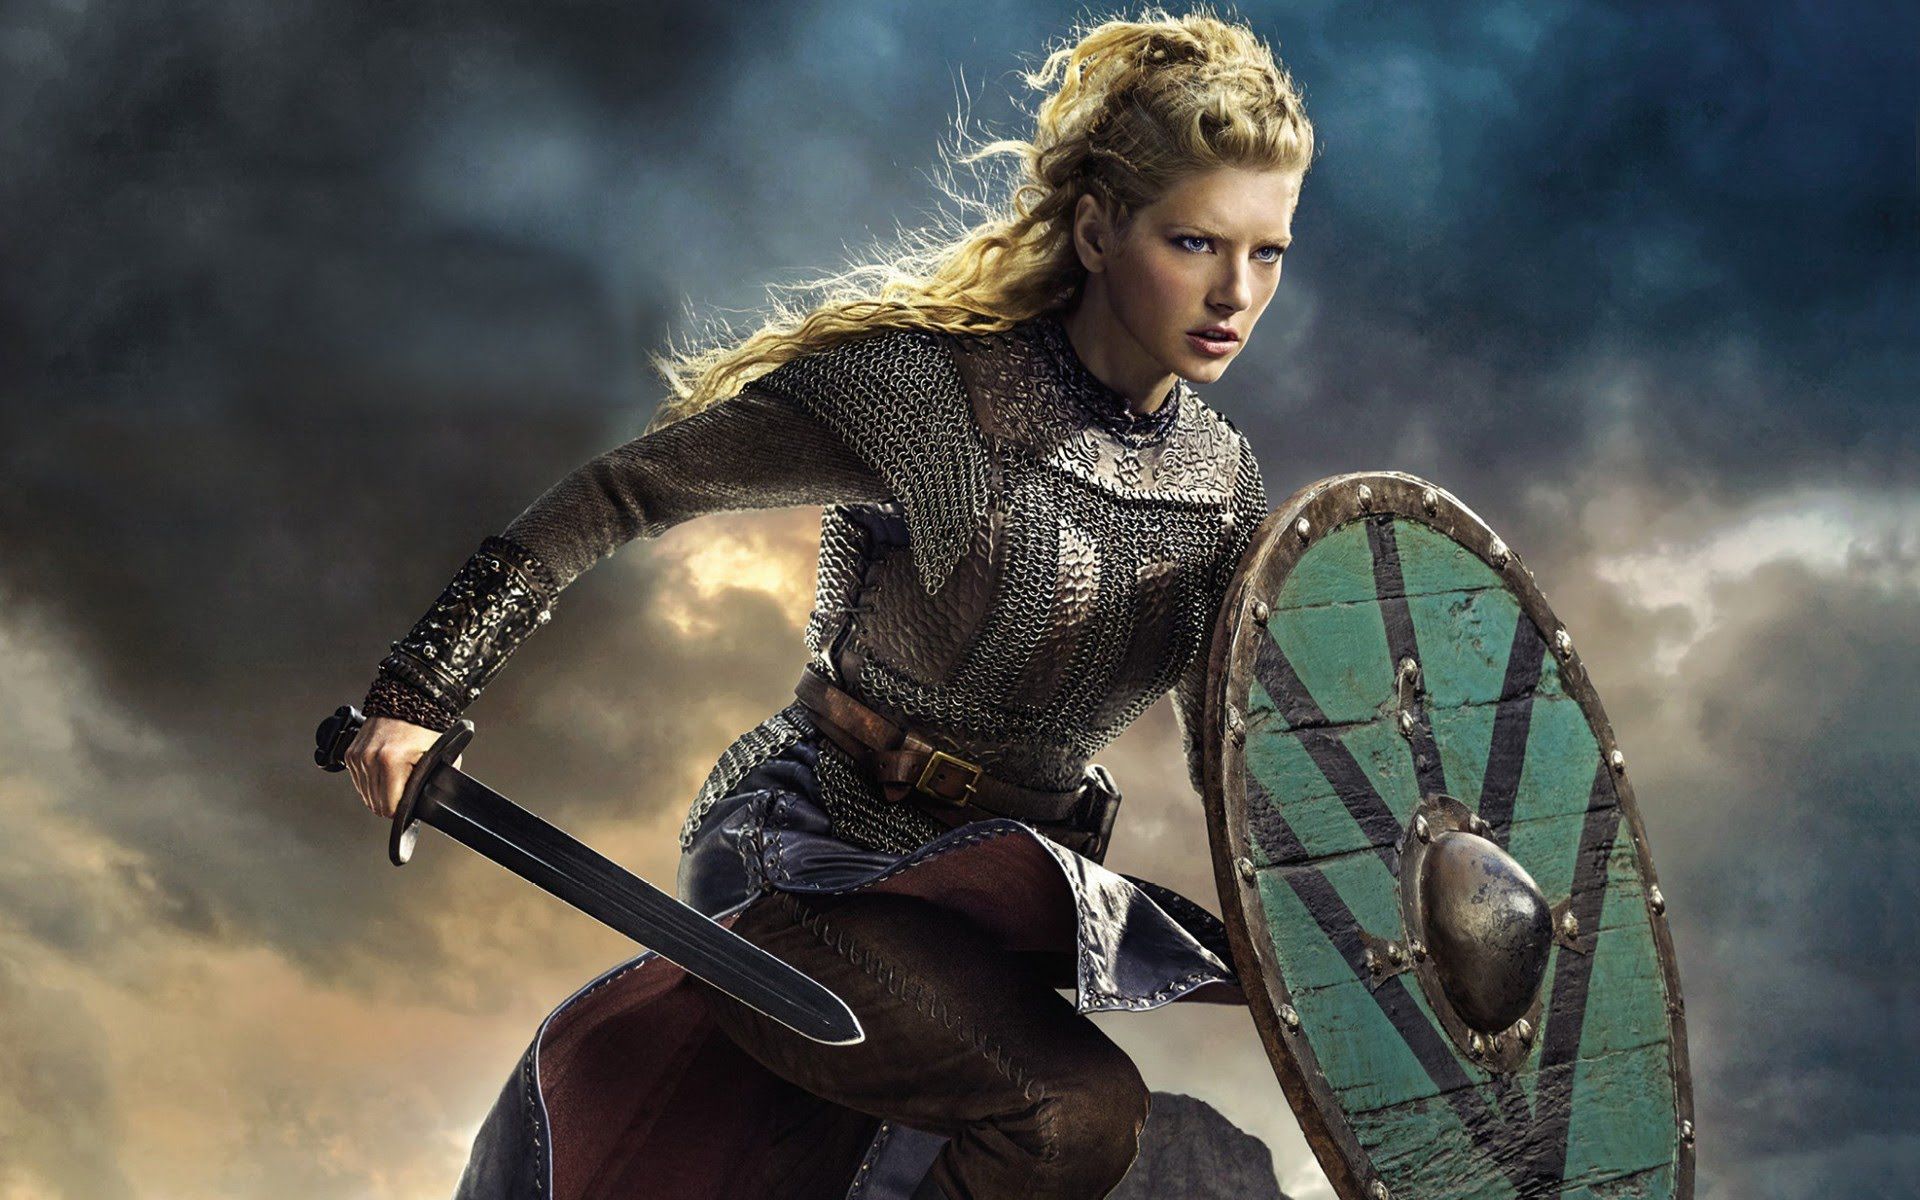 Proof of Viking warrior women? Maybe, but maybe not | Genetic ...